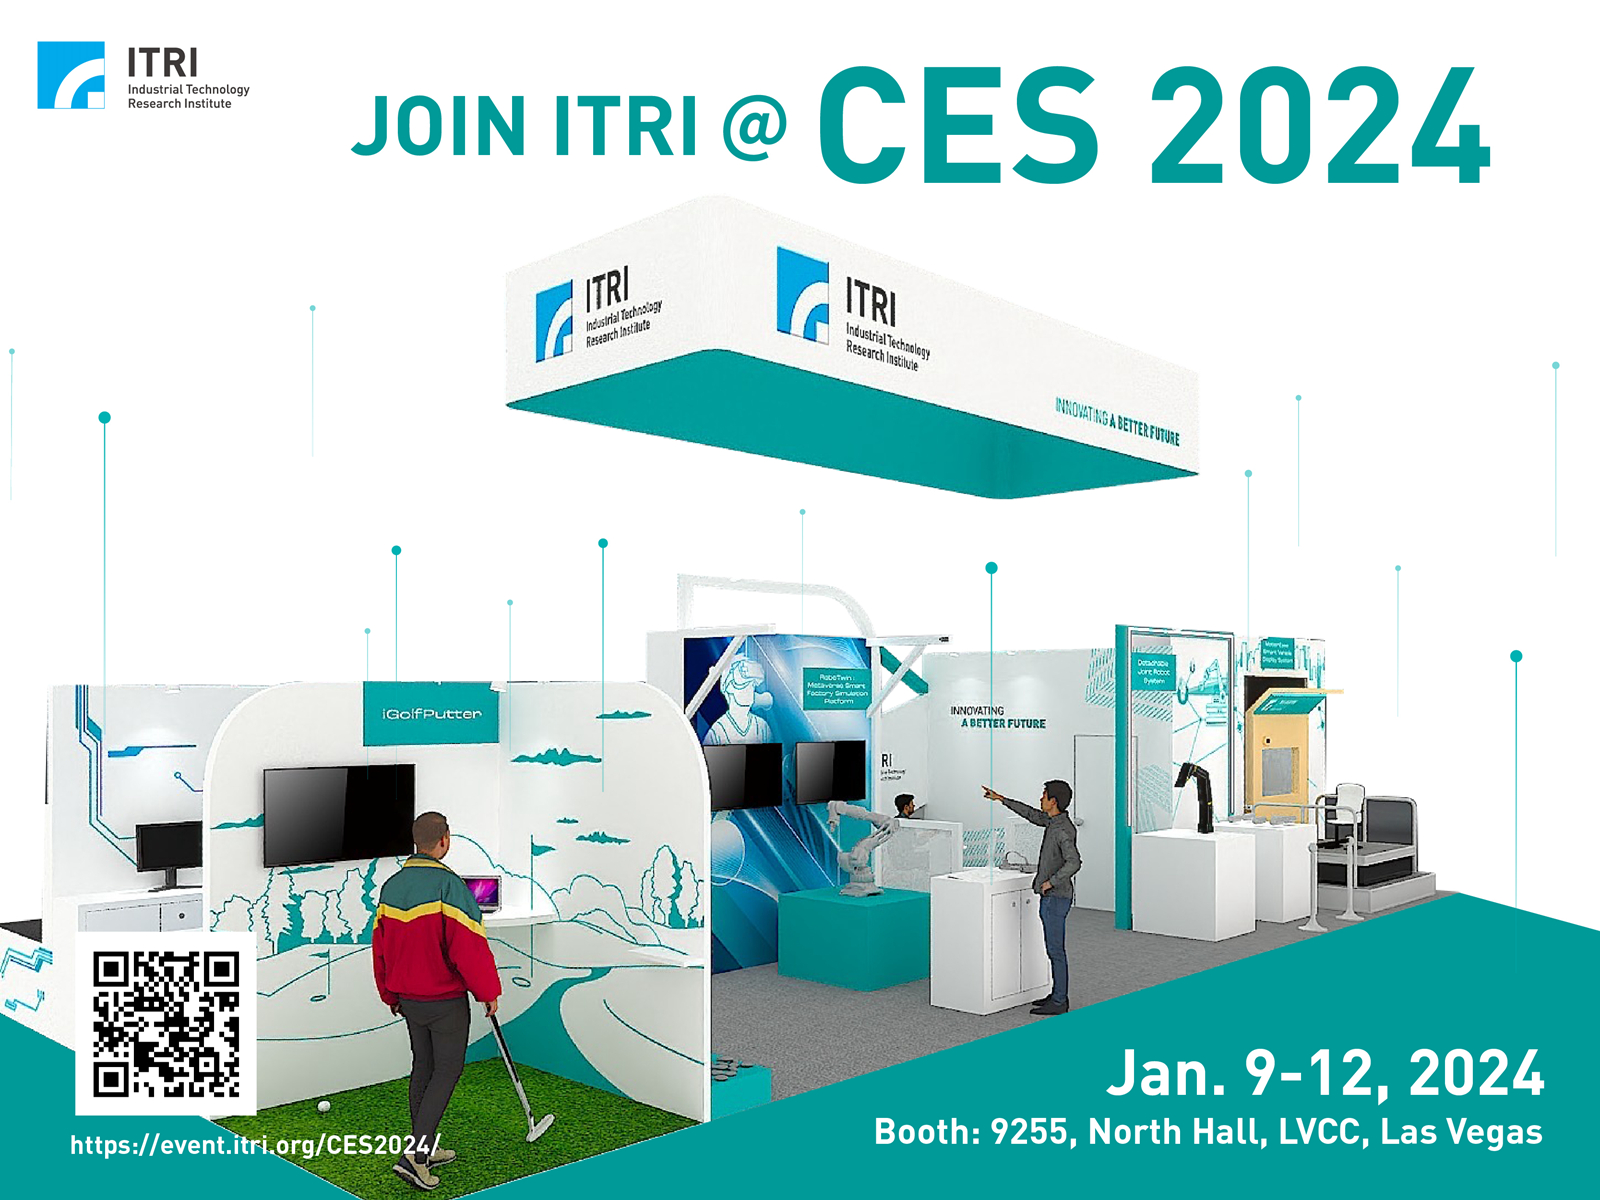 Explore ITRI's AI, robotics, ICT, and health innovations at CES booth 9255 and on its event website.